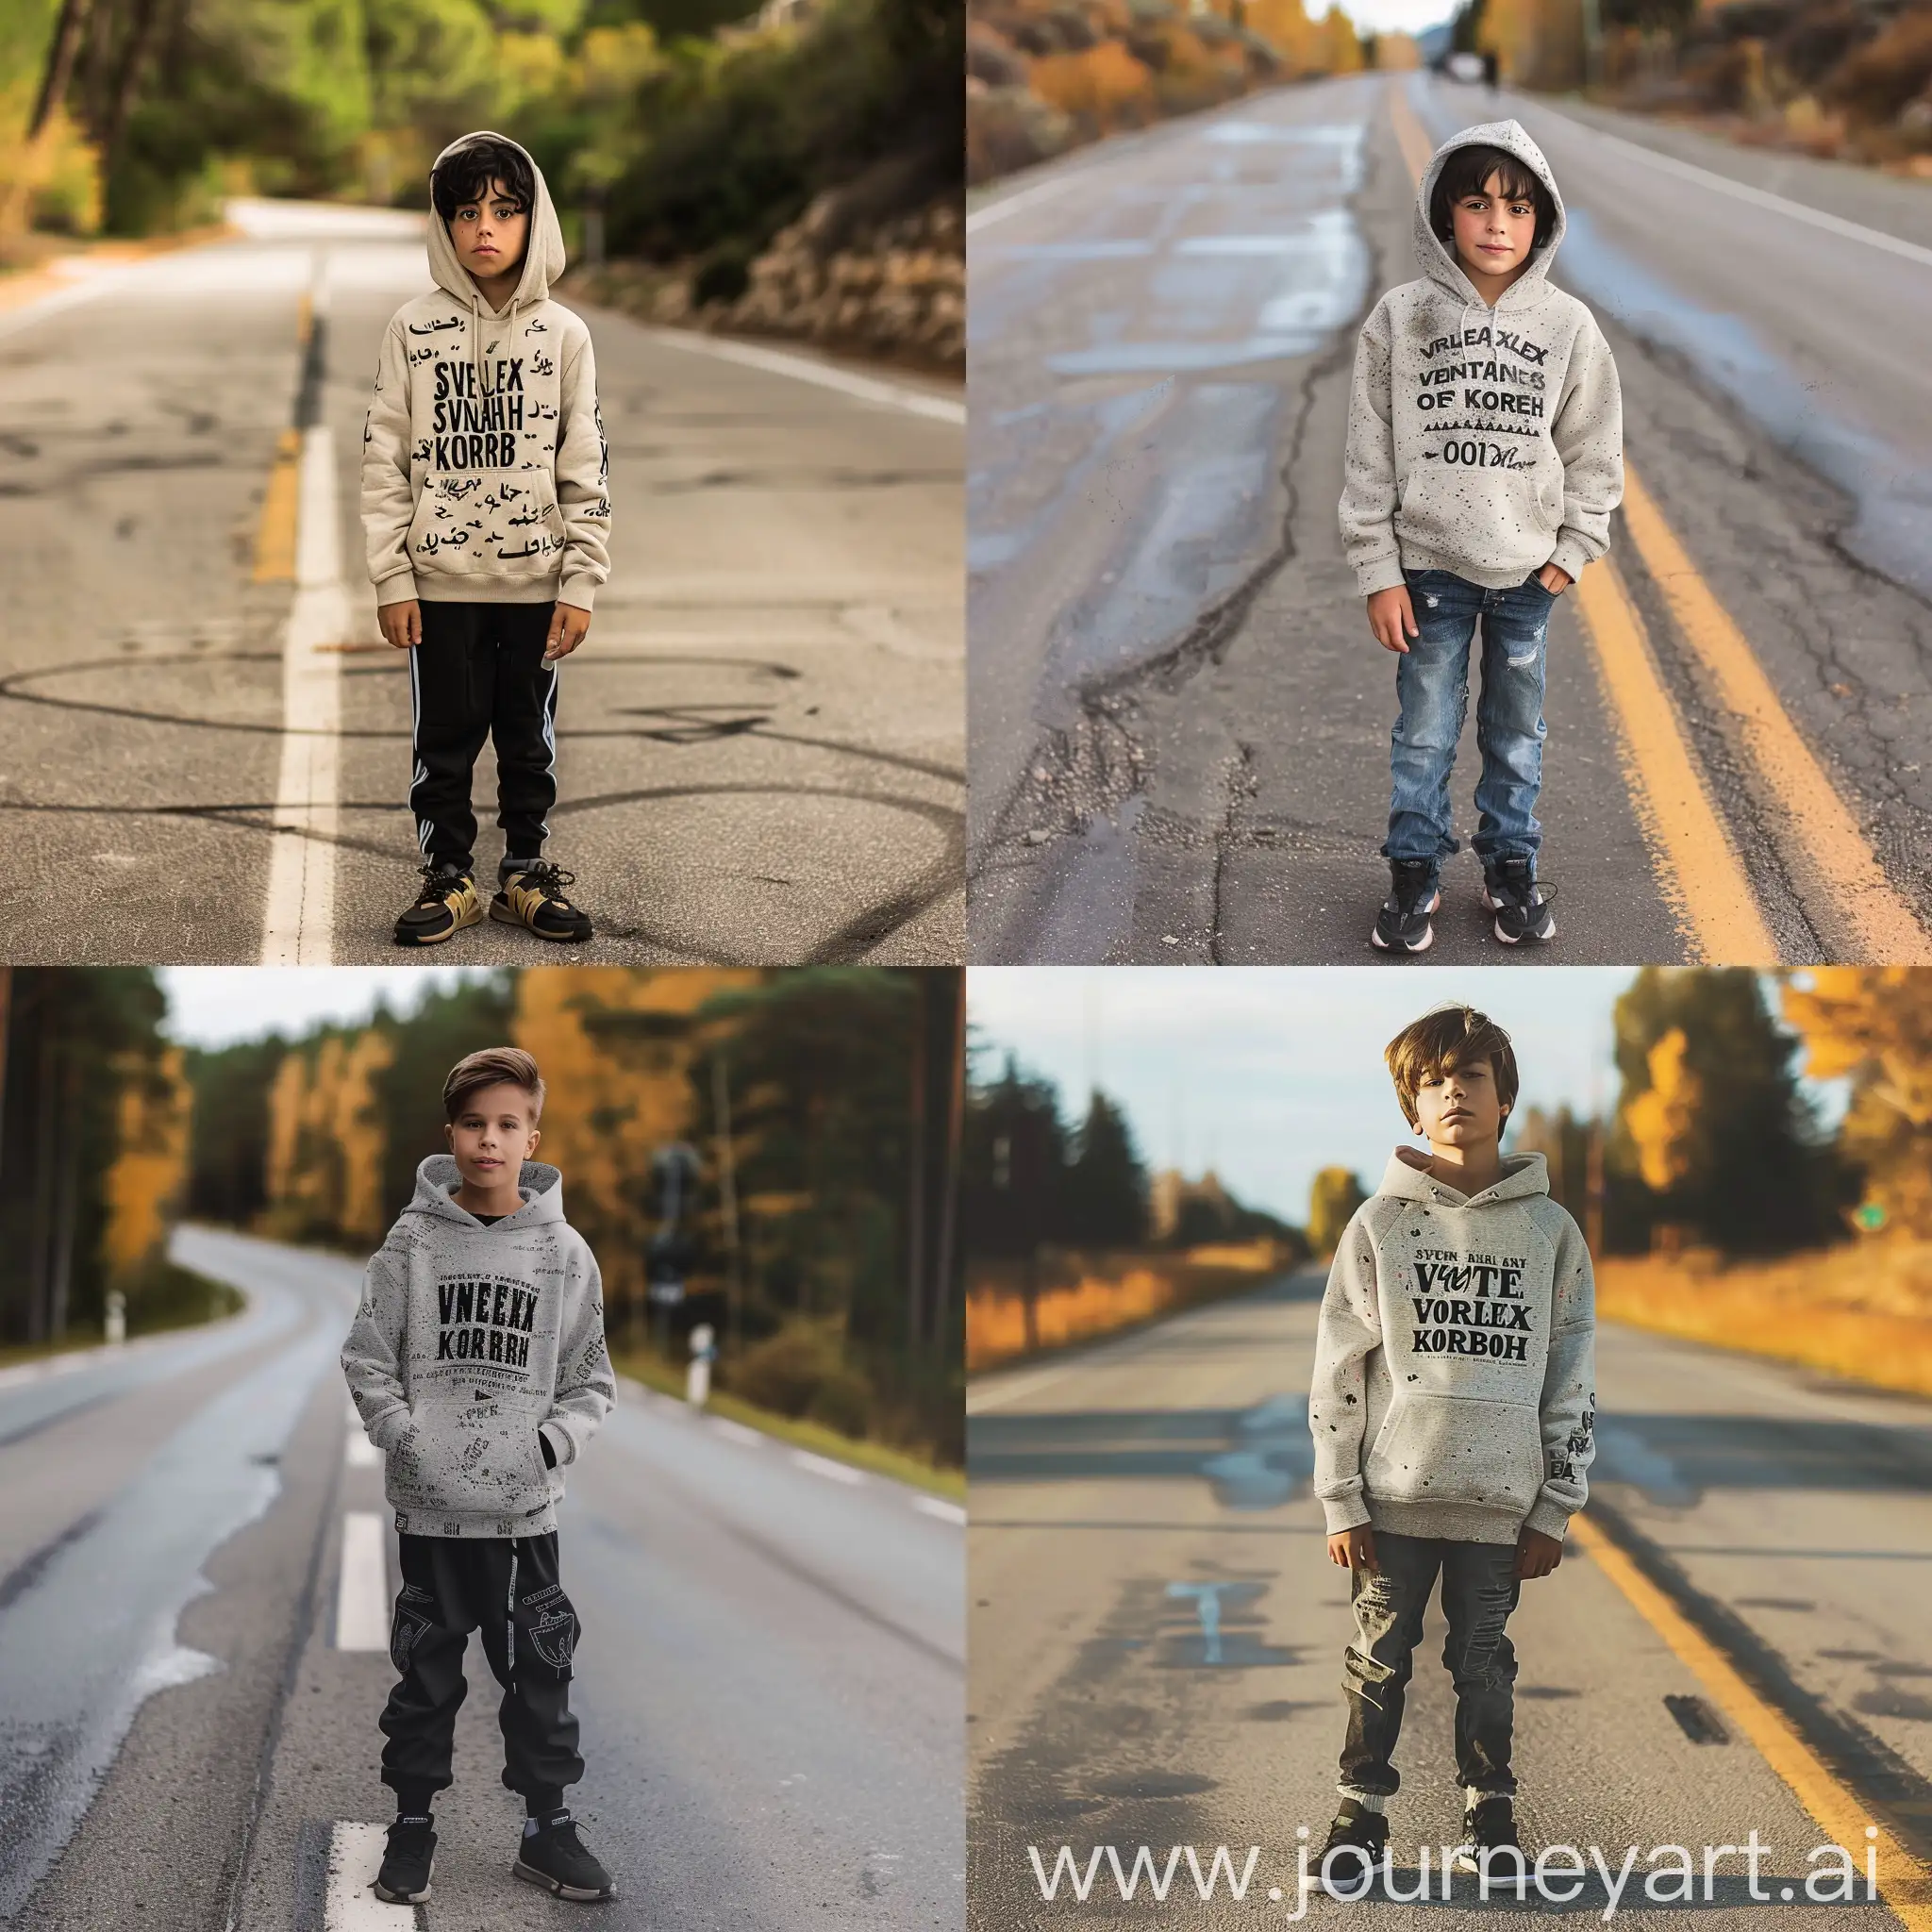 A boy standing on the road wearing a hoodie with a writings saying Ventex Korah